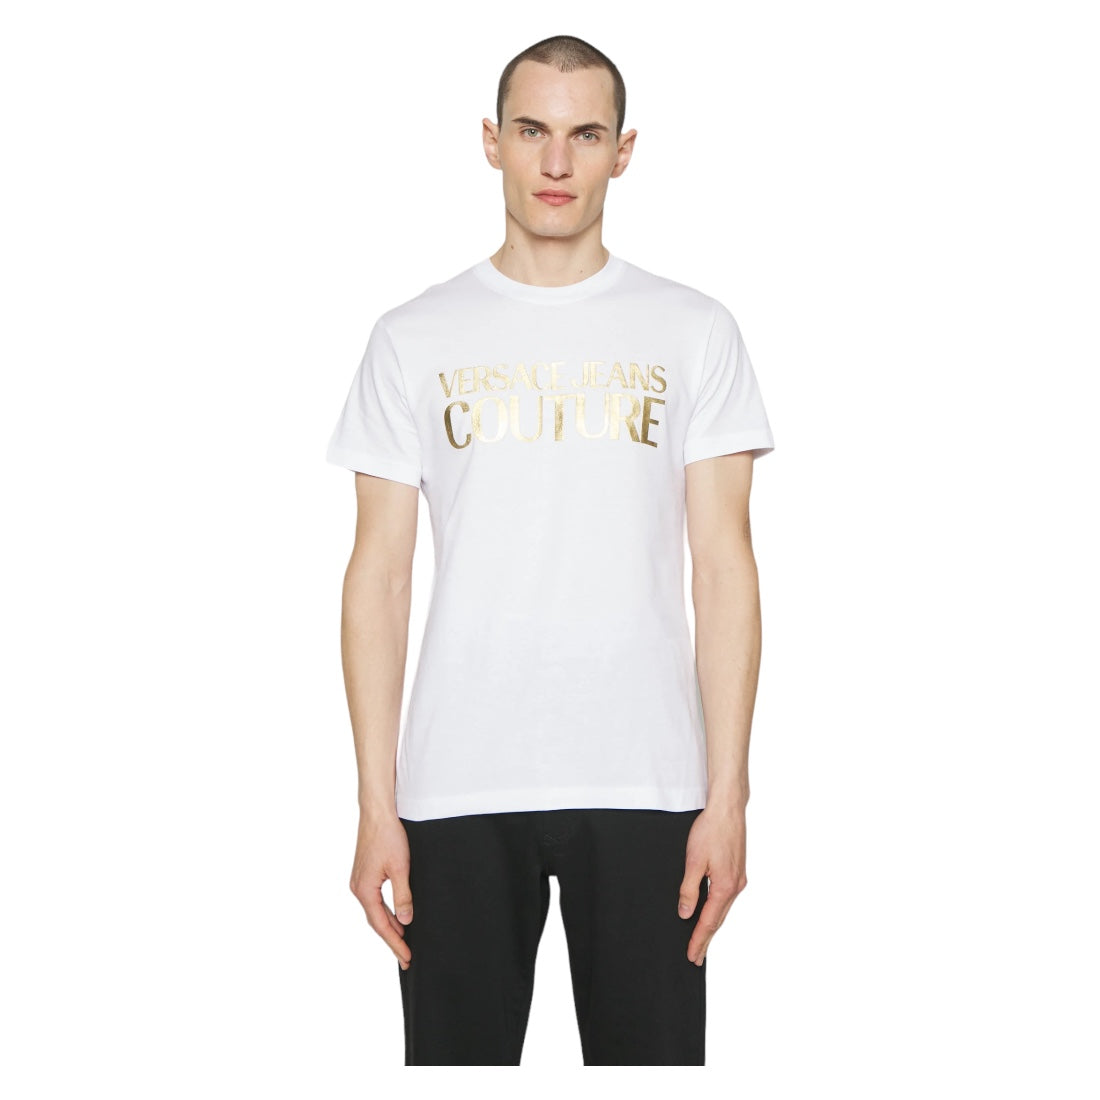 Versace Jeans Couture Logo Thick Foil T-shirt White